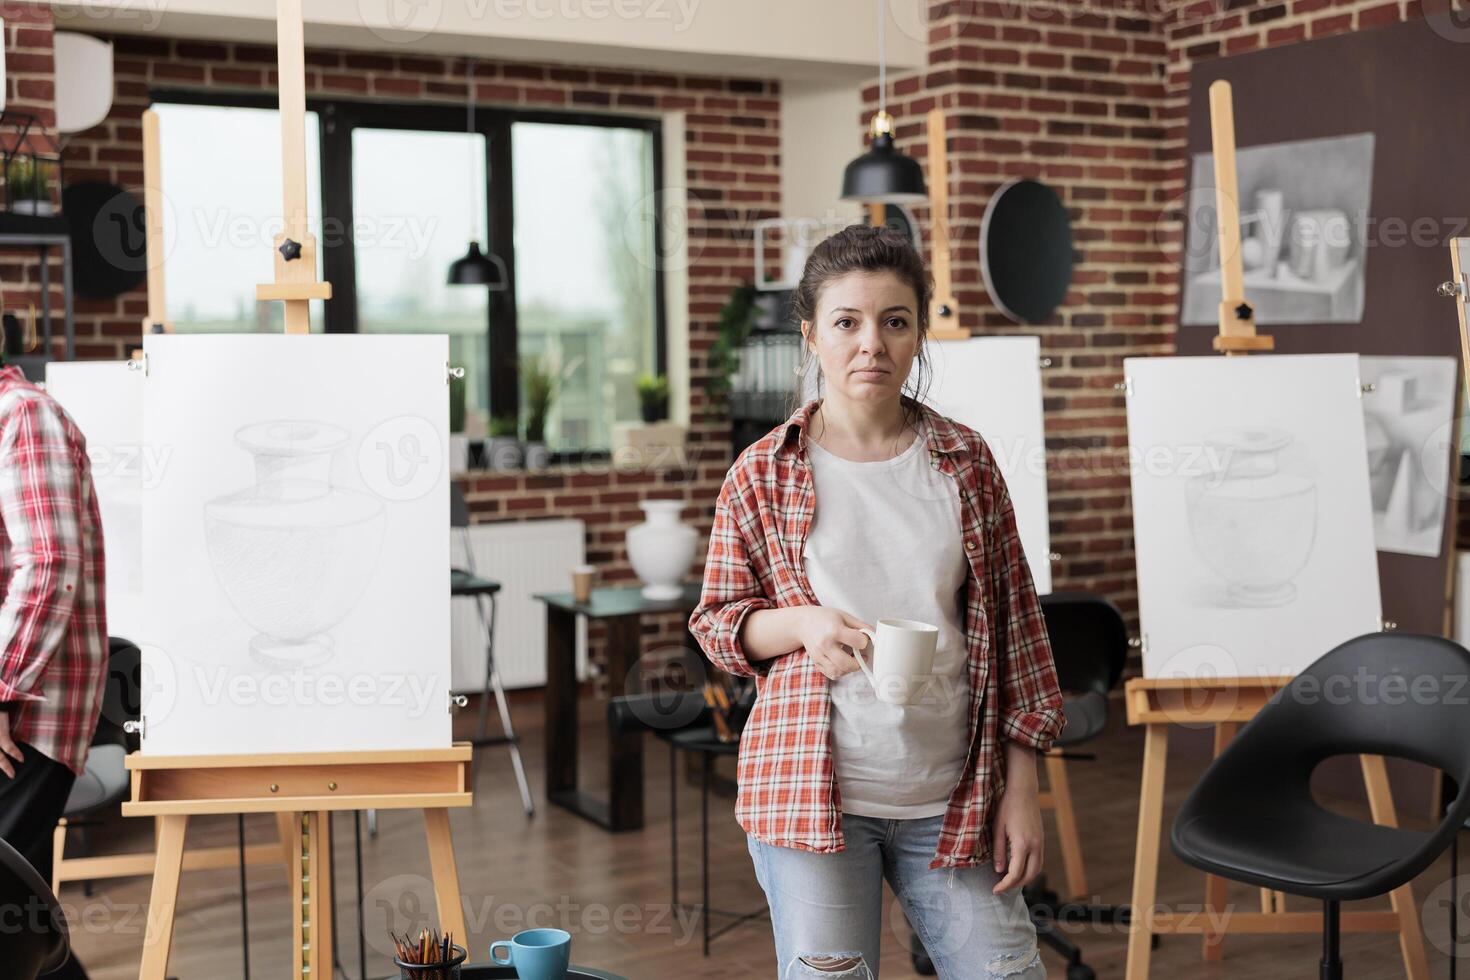 People and creative hobbies. Young woman standing against wooden easels in art classroom holding cup of coffee or tea, people learning pencil sketching techniques at school of contemporary arts photo